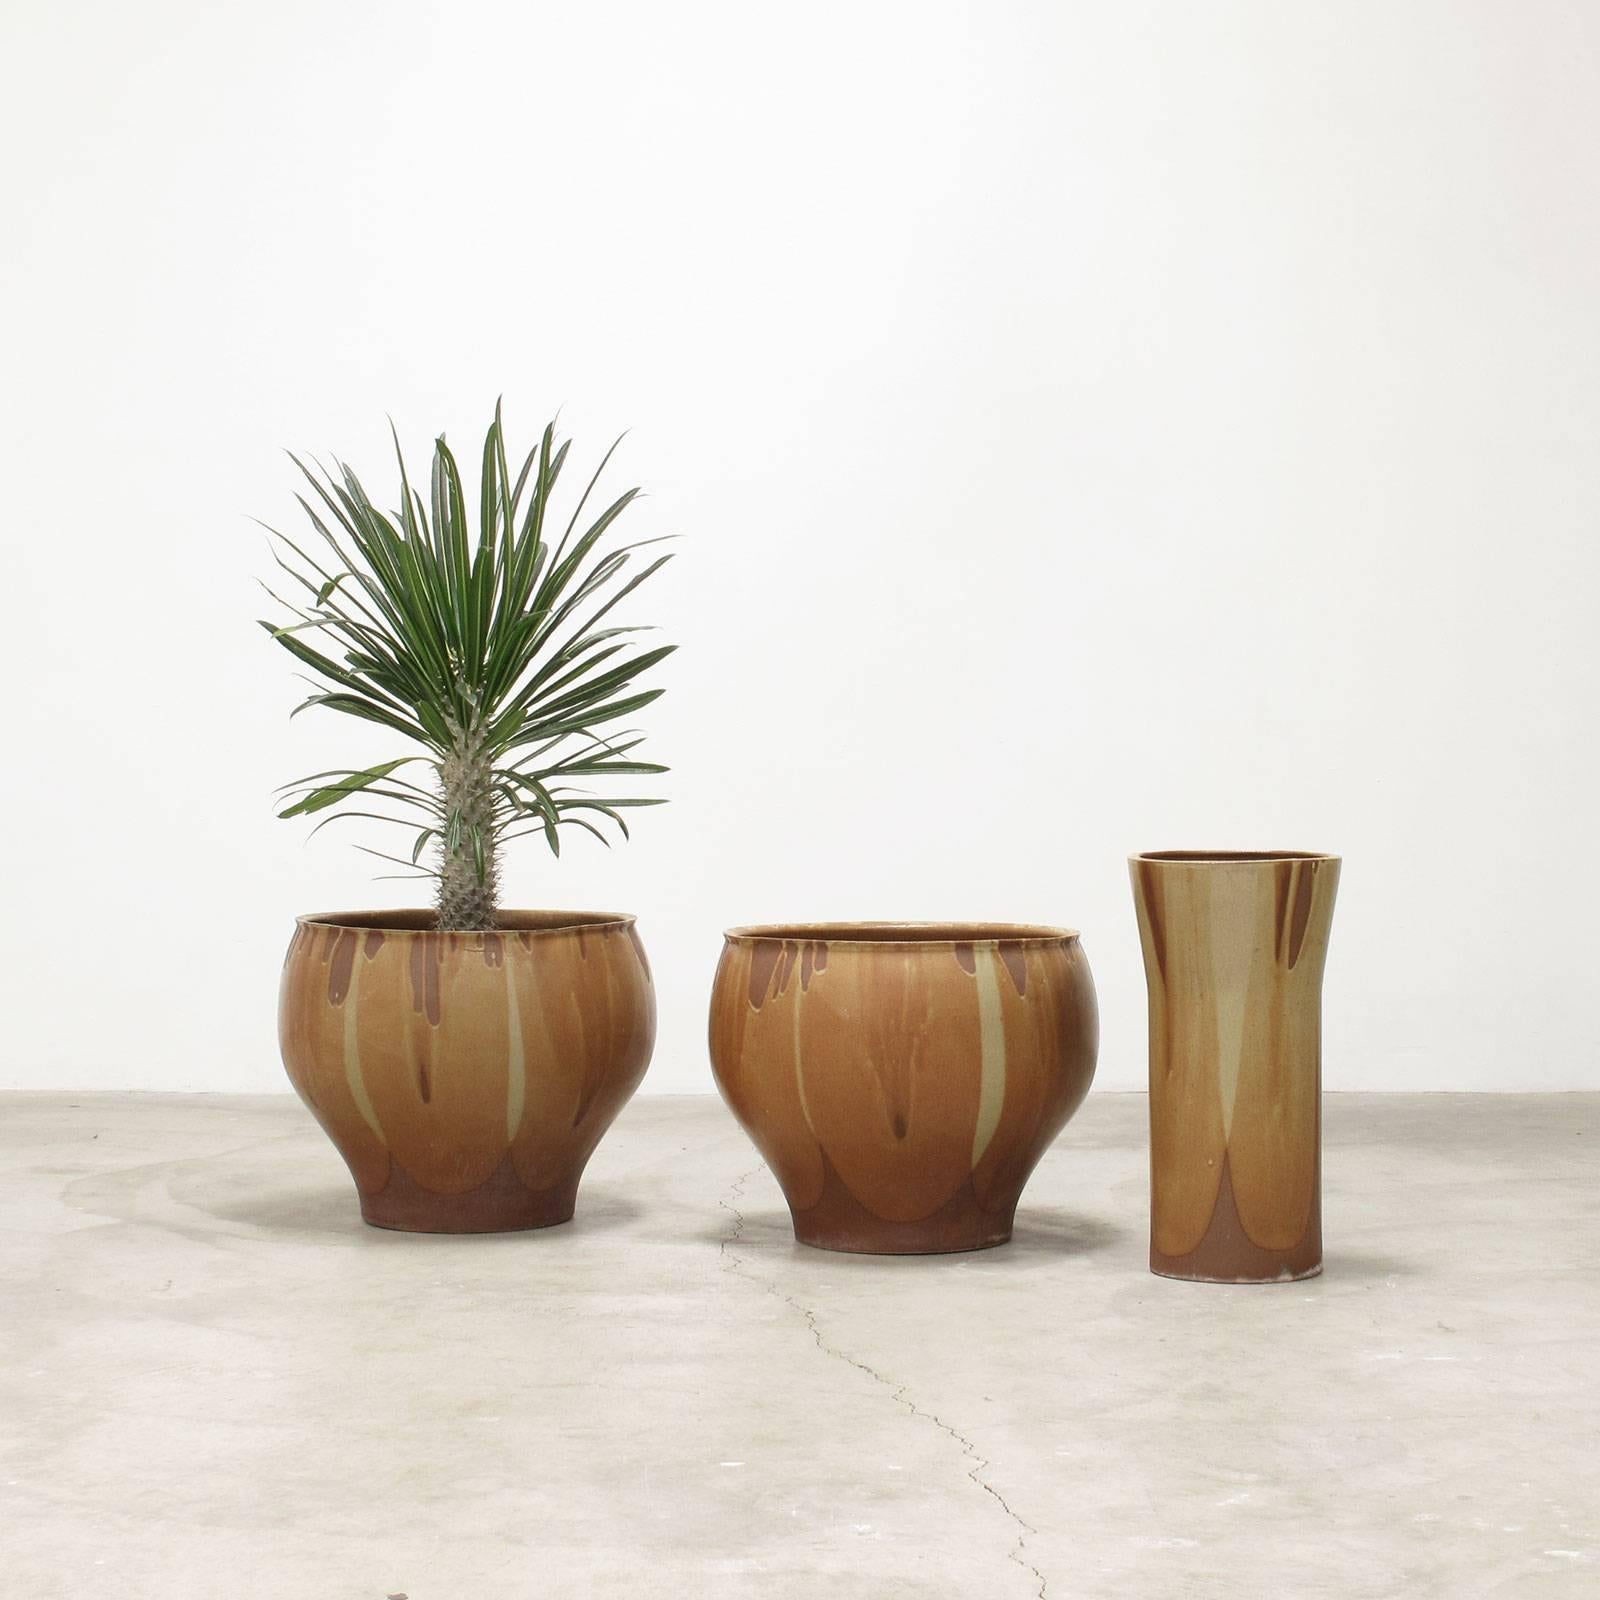 American David Cressey Pro Artisan Collection 'Flame' Glaze Ceramic Planters, 1960s For Sale